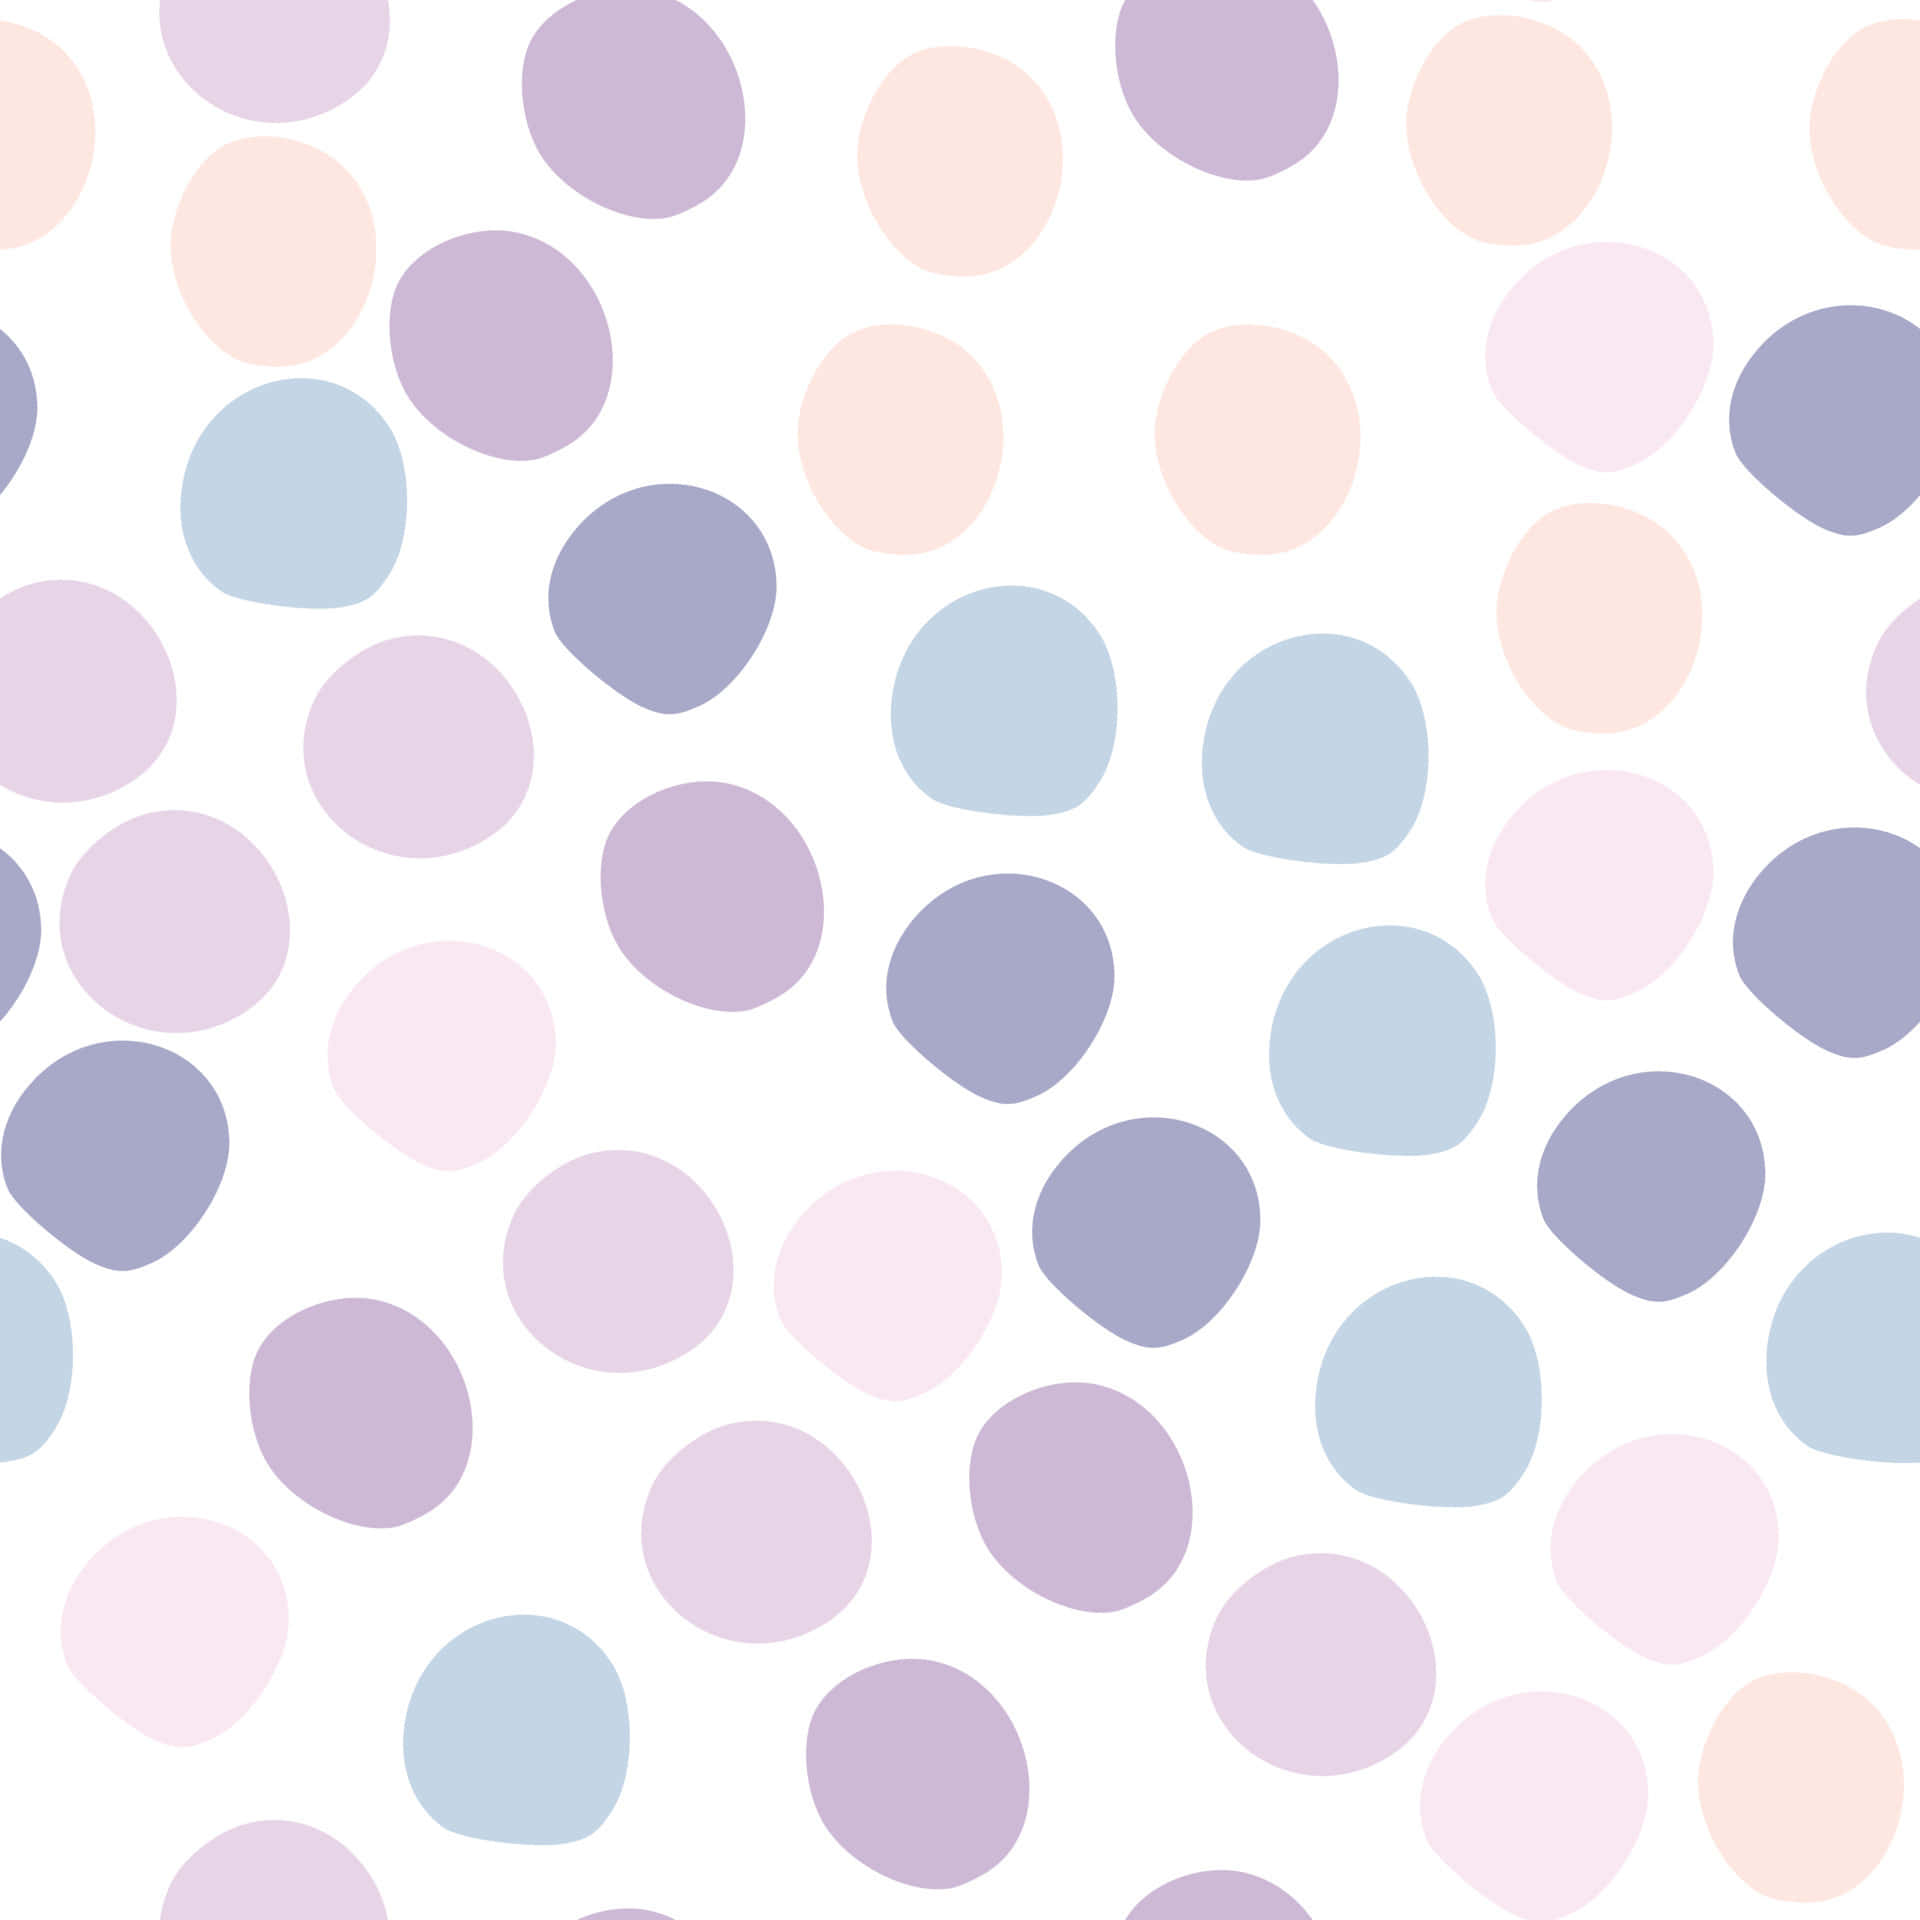 “A cheerful pattern of pink and white polka dots.” Wallpaper